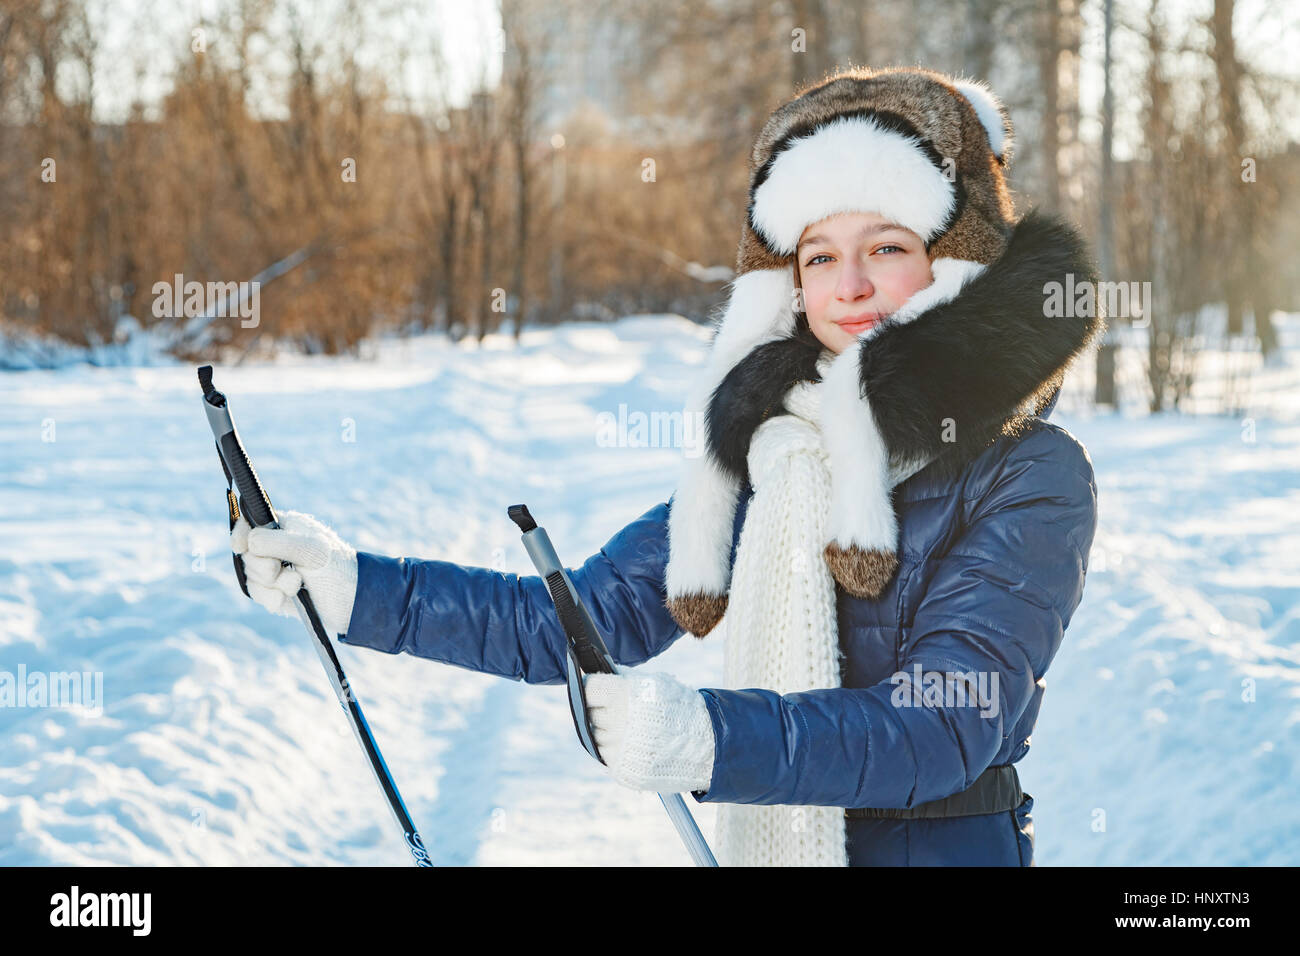 Cross-country skiing woman doing classic nordic cross country skiing in trail tracks in snow covered forest Stock Photo